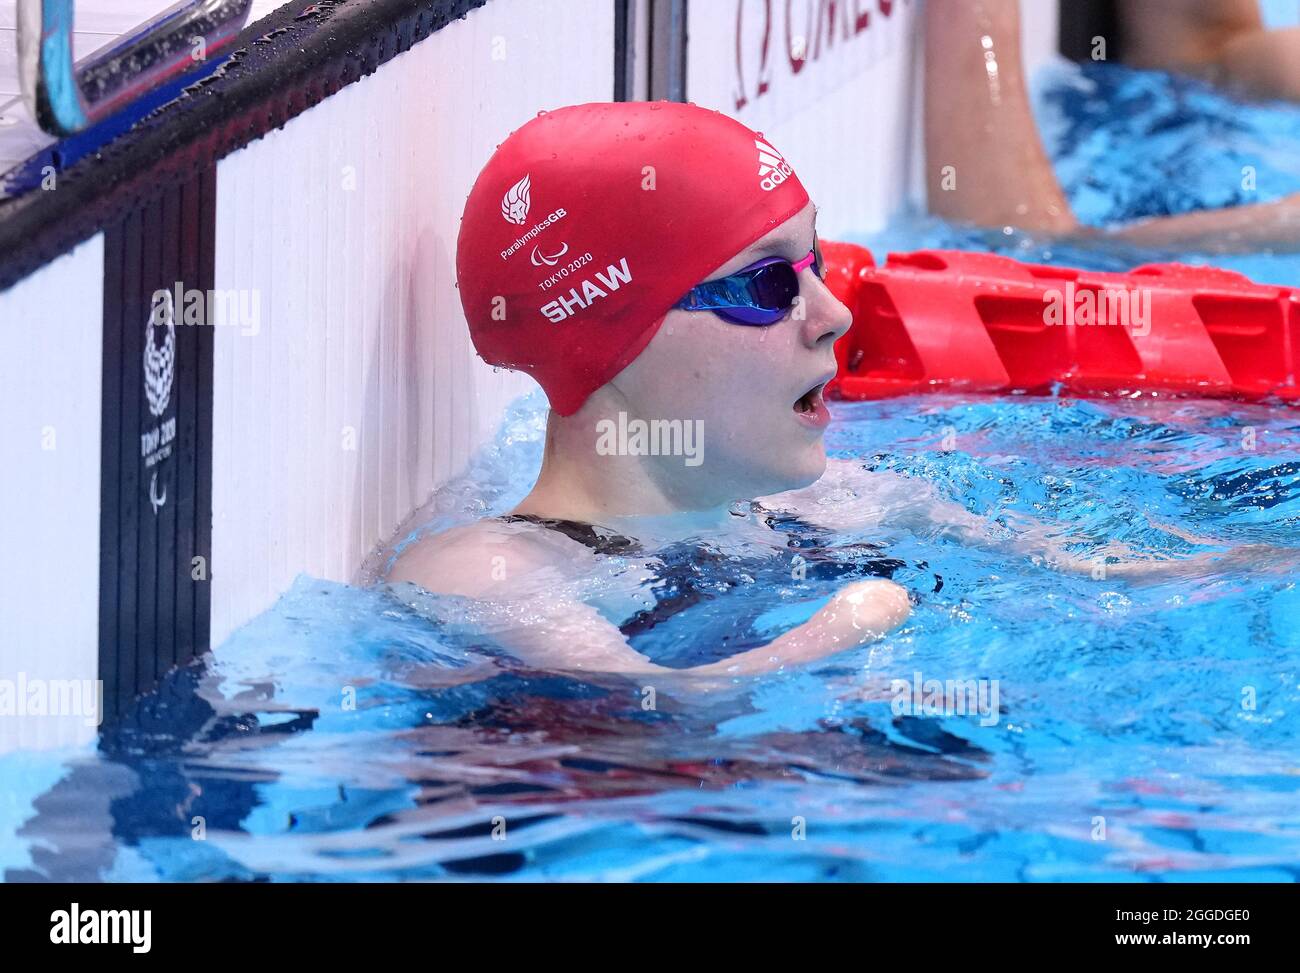 Great Britain's Toni Shaw reacts after finishing fourth in the Women's 100m Freestyle - S9 Final at the Tokyo Aquatics Centre during day seven of the Tokyo 2020 Paralympic Games in Japan. Picture date: Tuesday August 31, 2021. Stock Photo